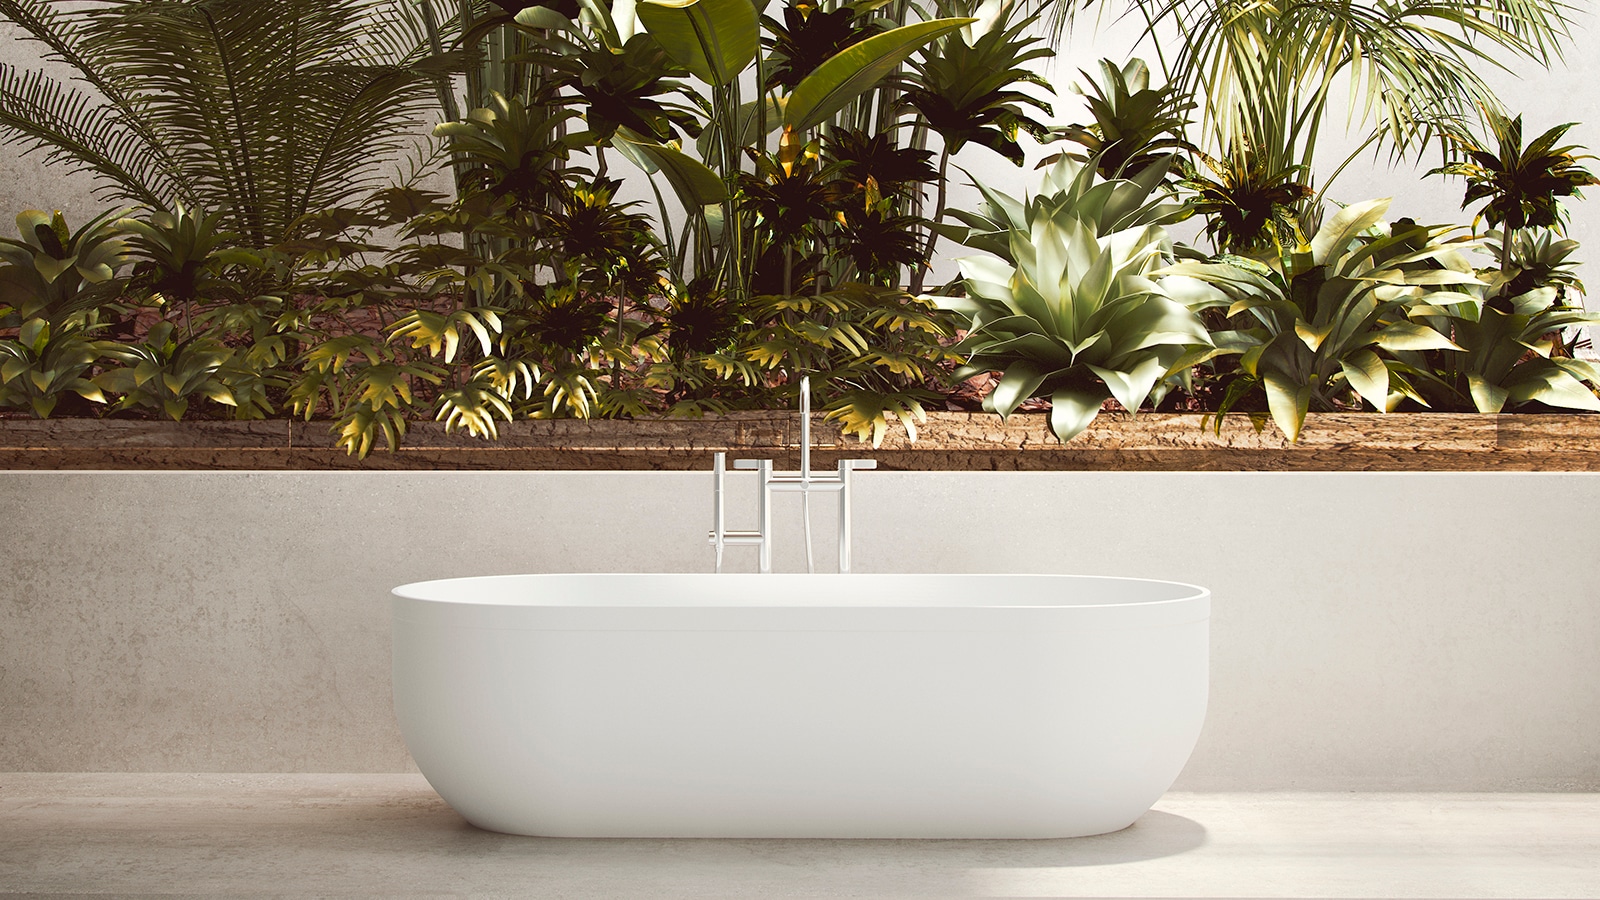 Types of bathtubs to soak and relax